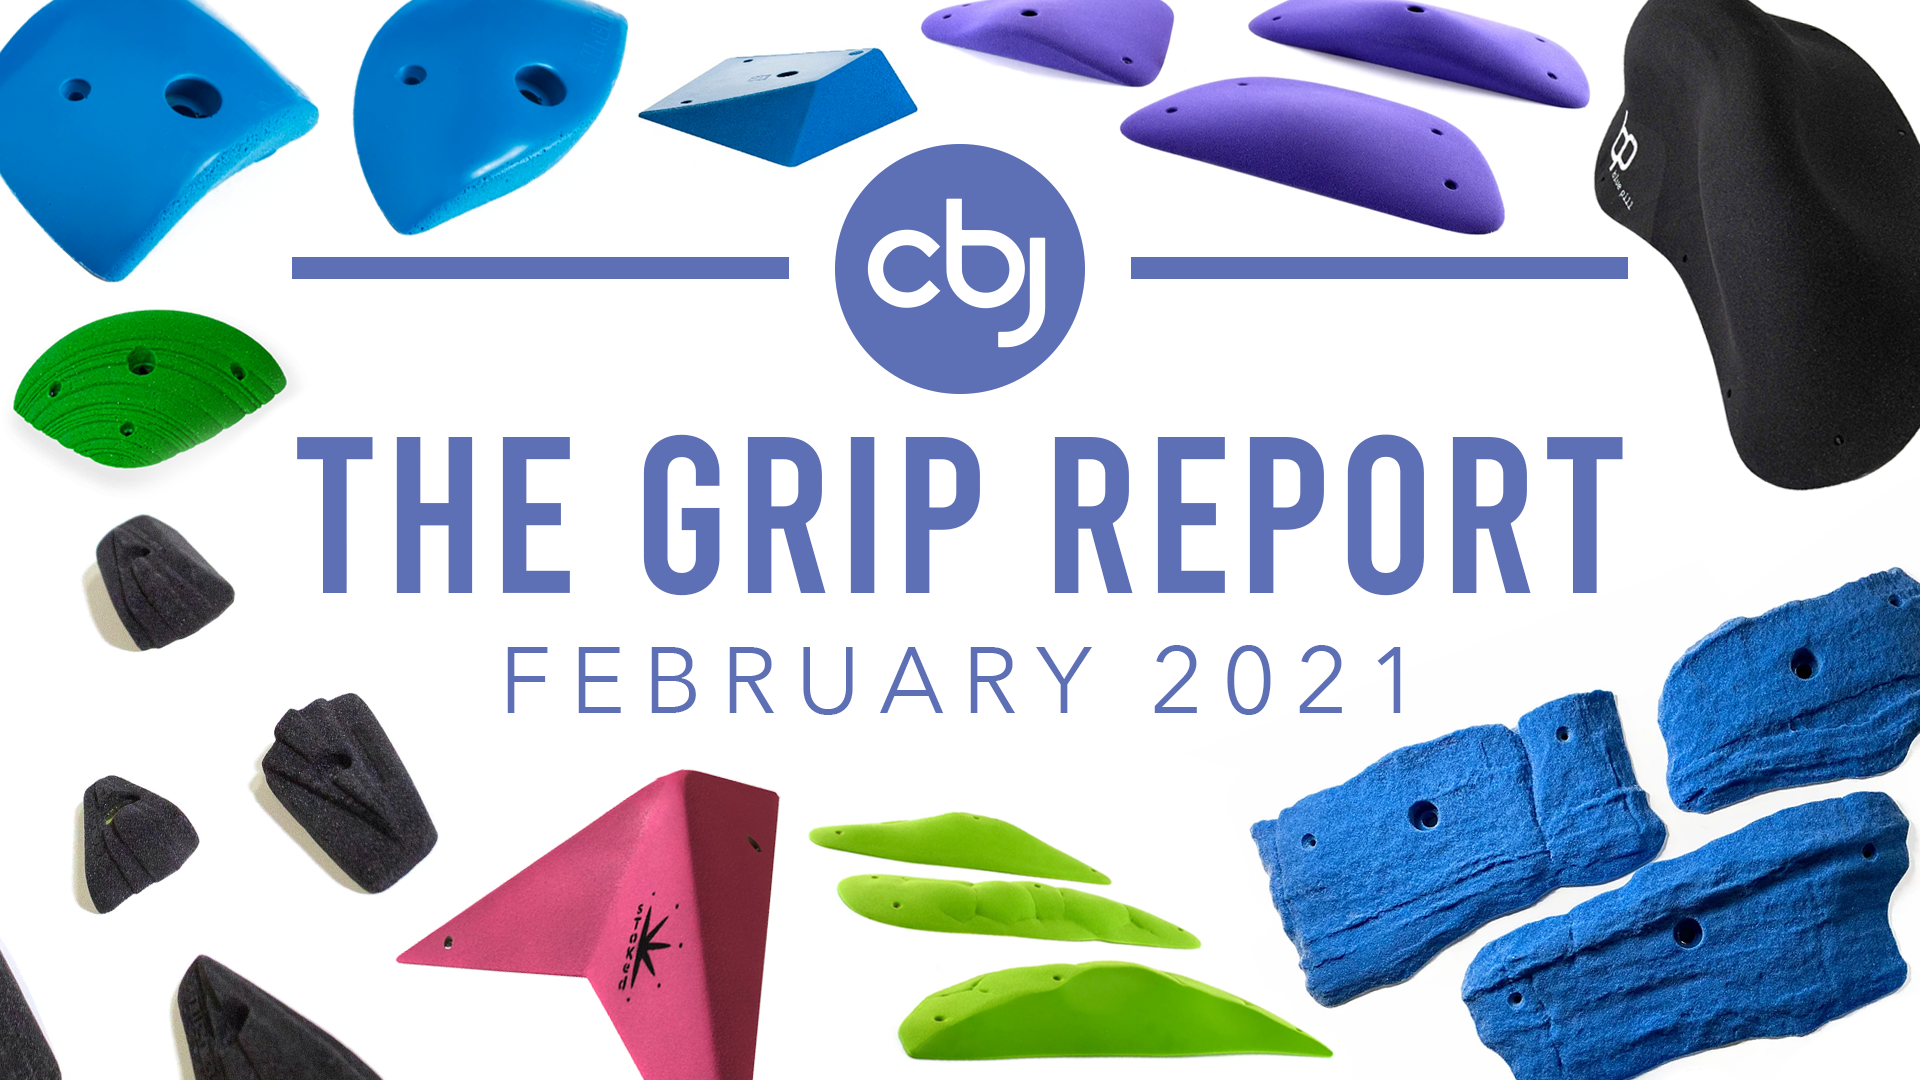 The Grip Report: February 2021